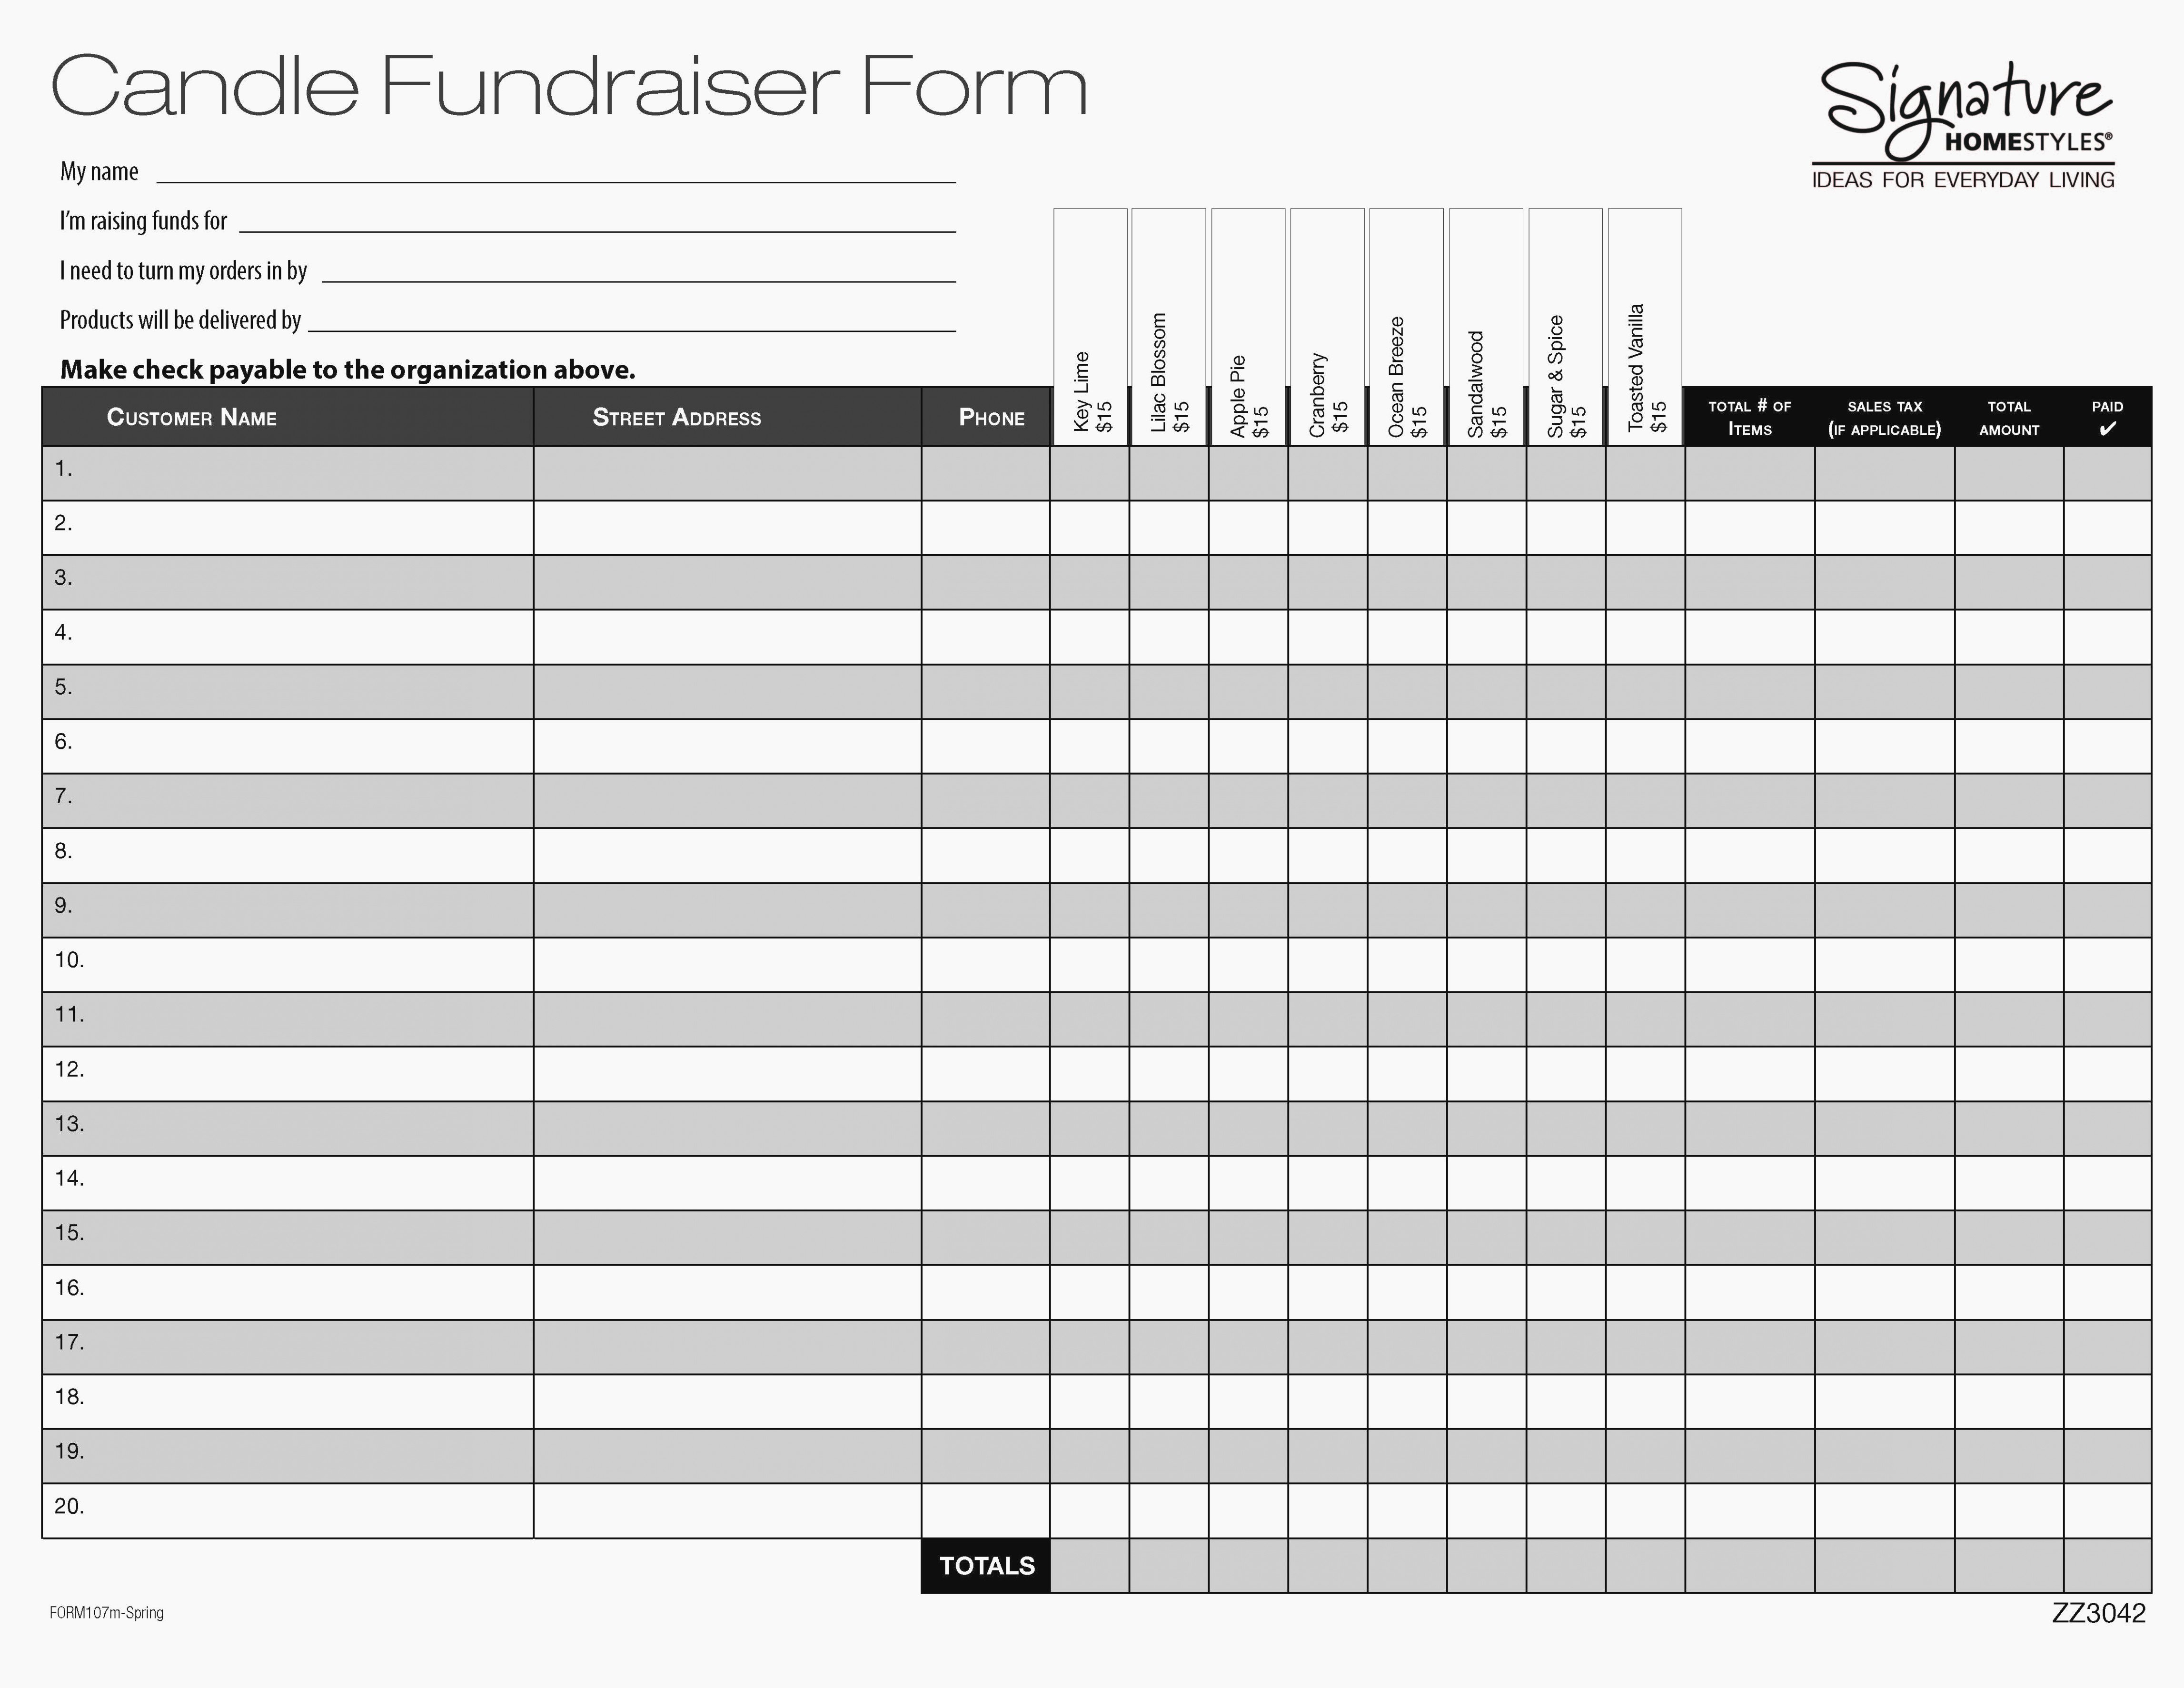 Fundraiser form Template Free New 12 Ideas to organize Your Own Fundraiser